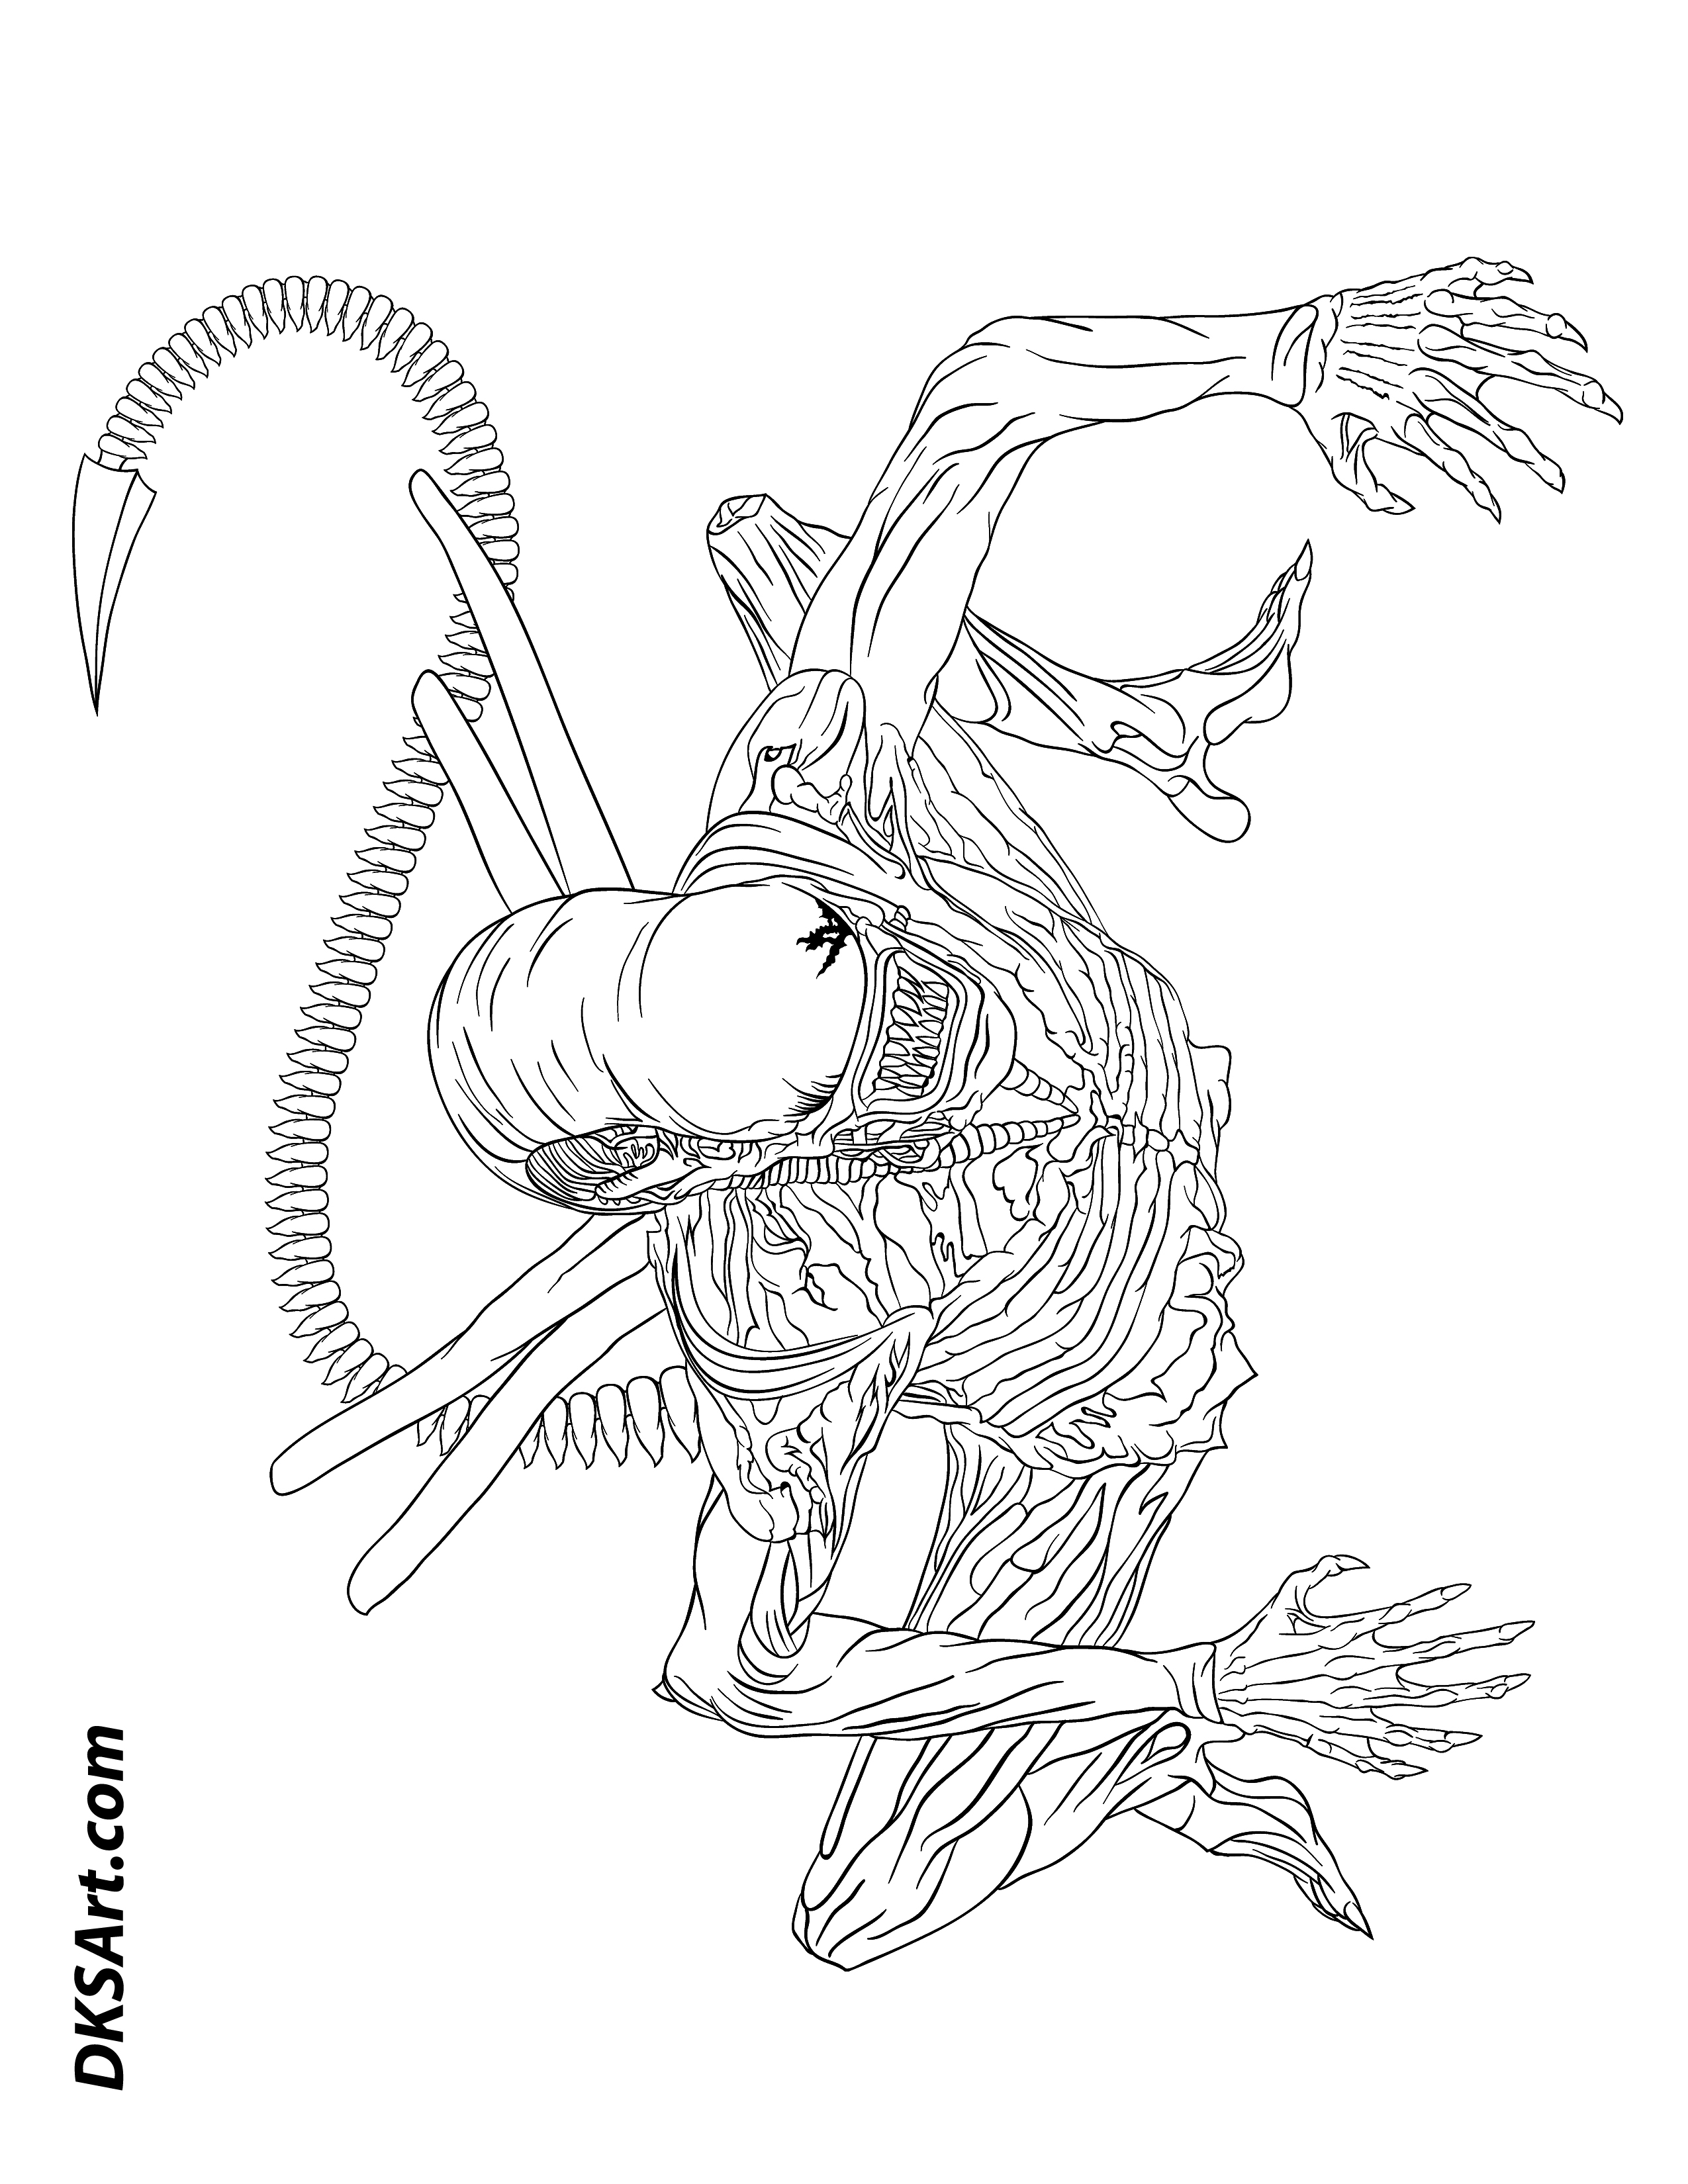 Download Xenomorph Alien Line Art Outline Free Coloring Book Page